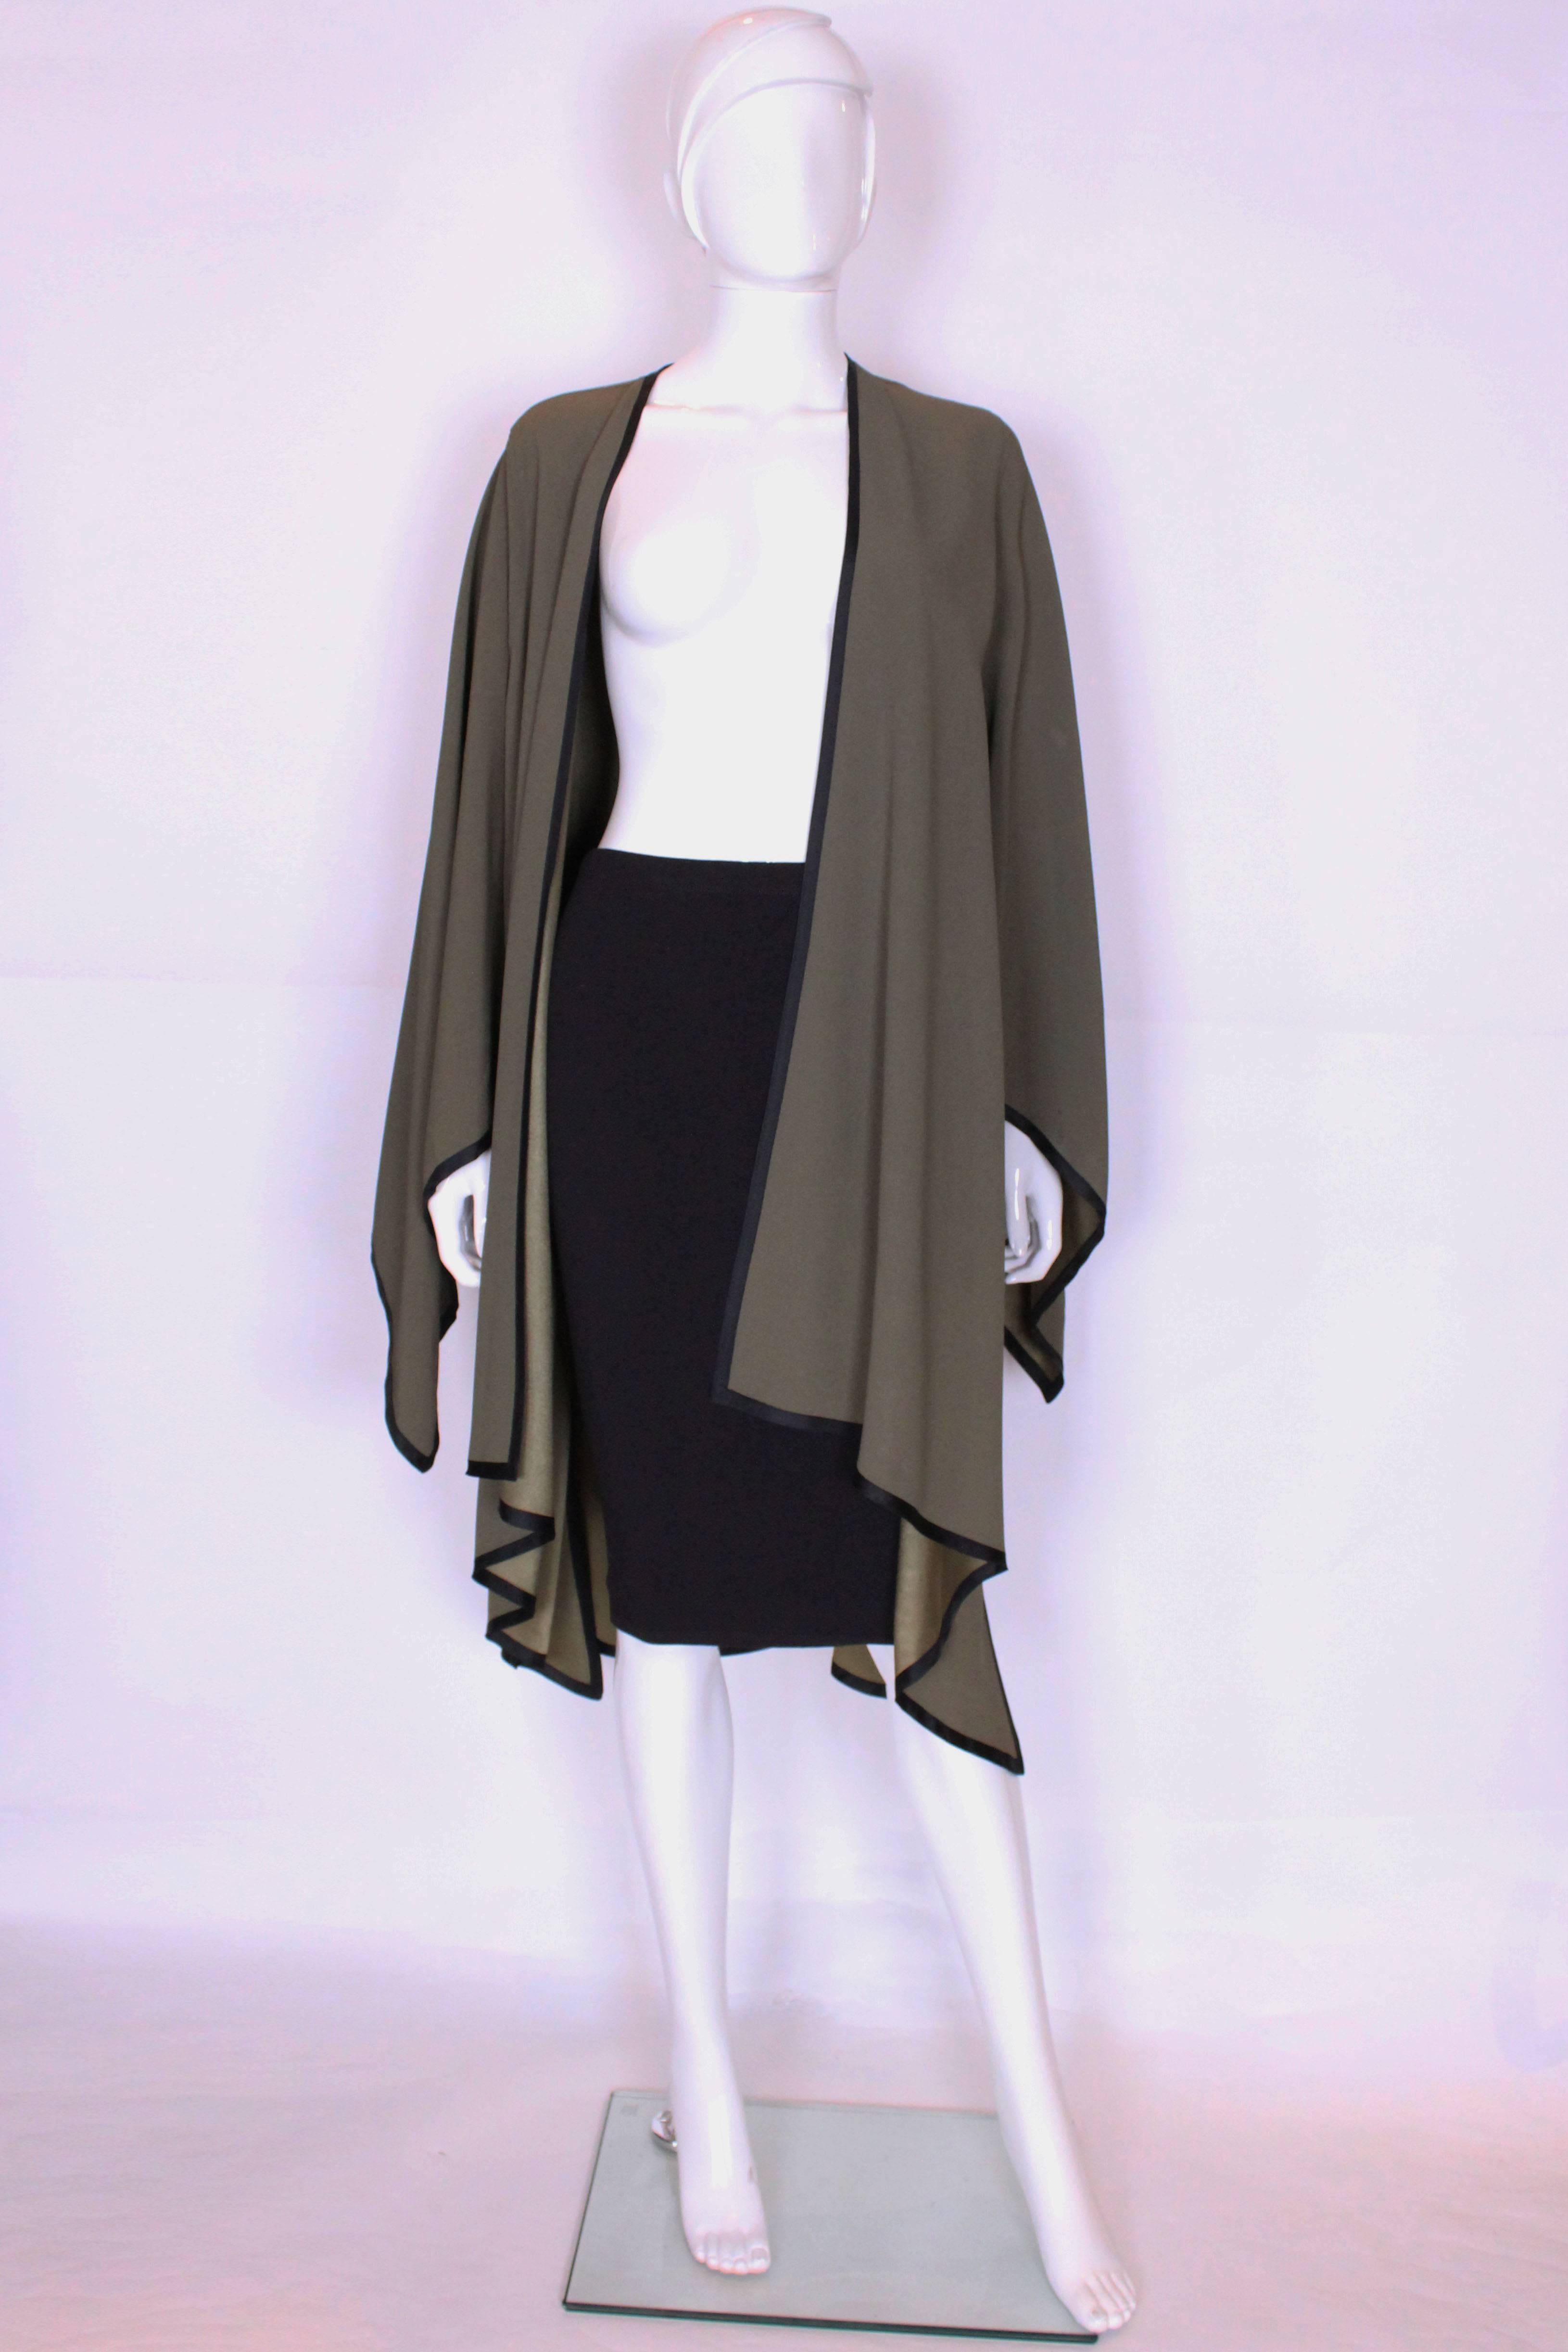 A great green over jacket by Yves Saint Laurent Rive Gauche.
In a soft sage green and trimmed in black this jacket works well with trousers or a skirt/dress.It has a wonderful drape,  the hemline style is the same for the  sleeves and hem.